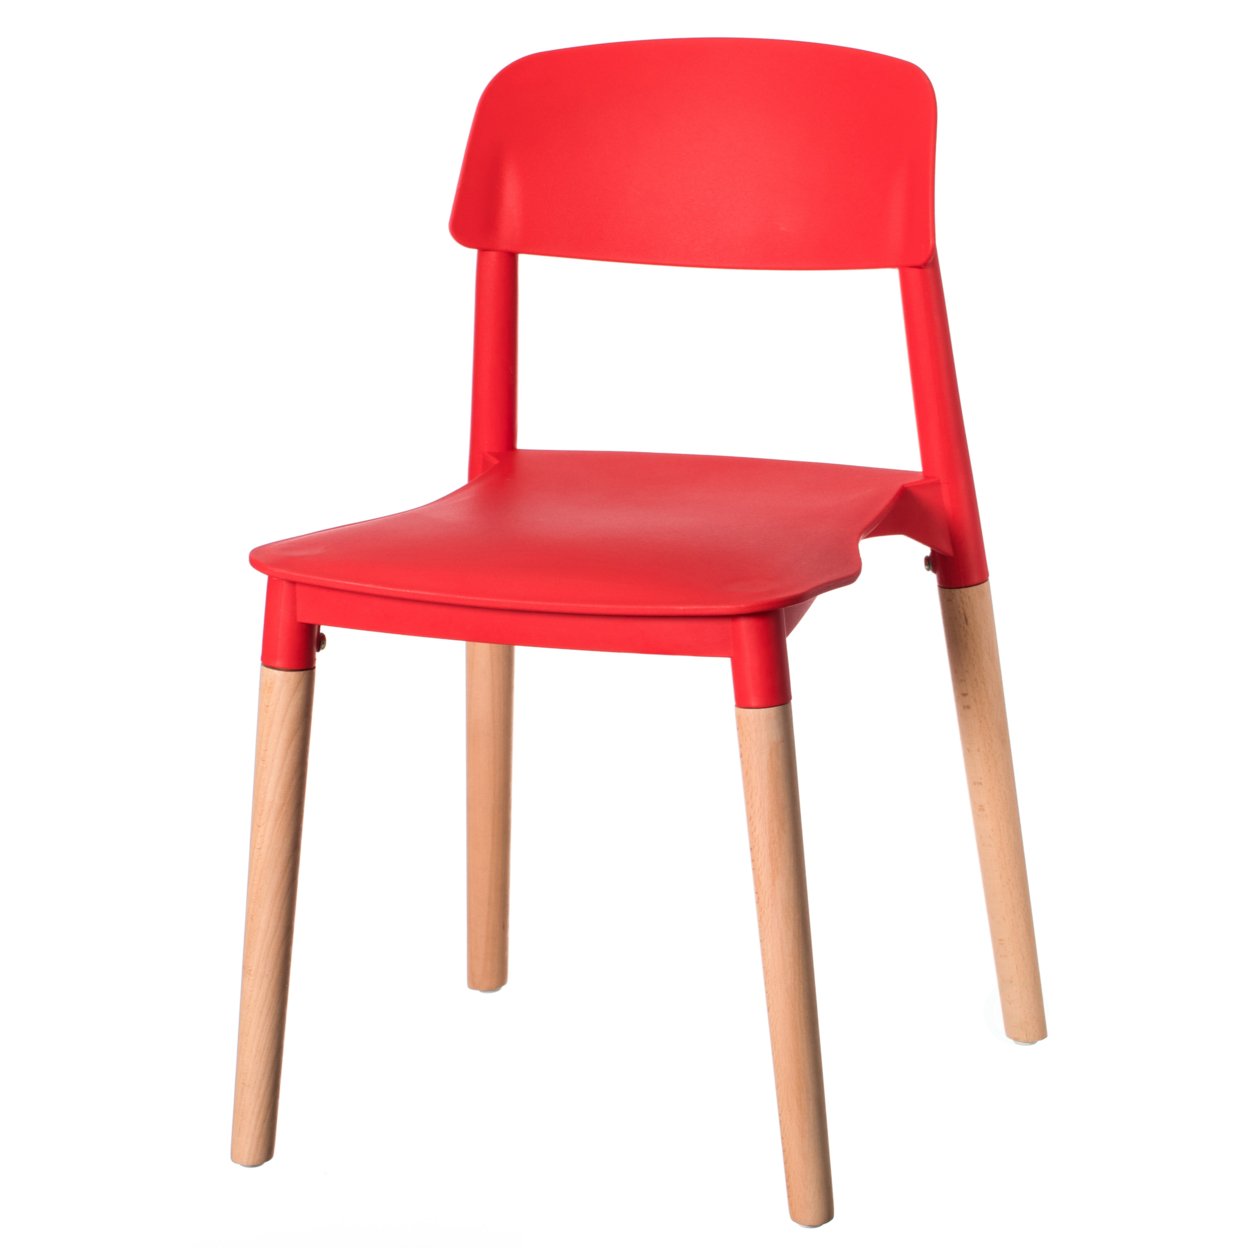 Modern Plastic Dining Chair Open Back With Beech Wood Legs - Single Red